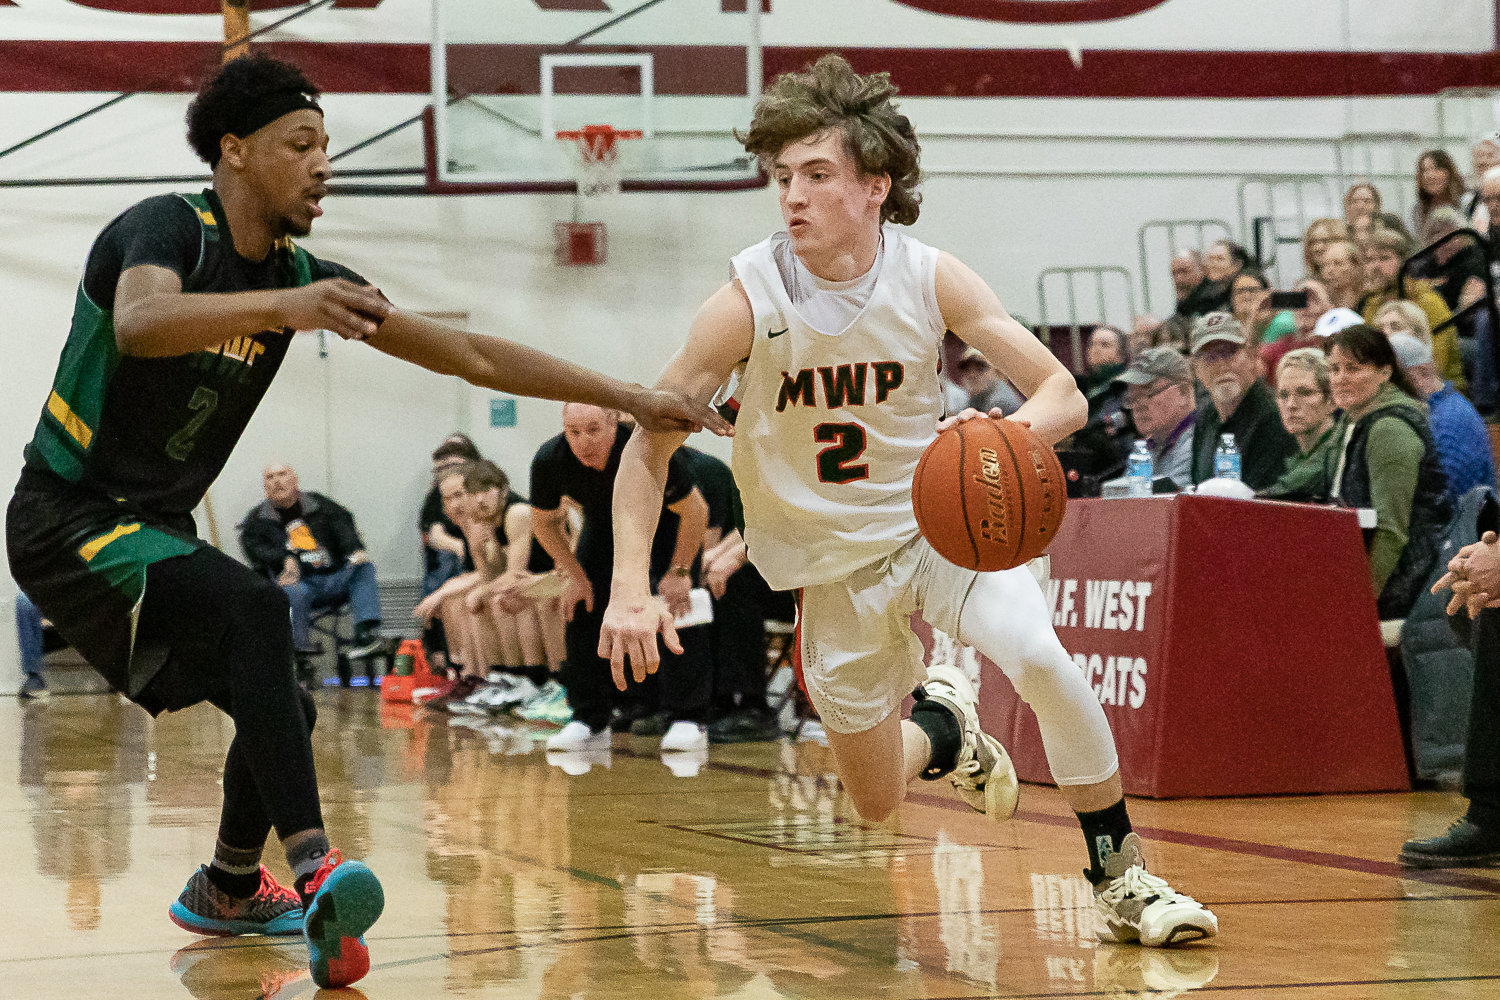 Morton-White Pass guard Judah Kelly drives baseline in an opening round of state matchup against Northwest Christian (Colbert) at W.F. West Feb. 25.